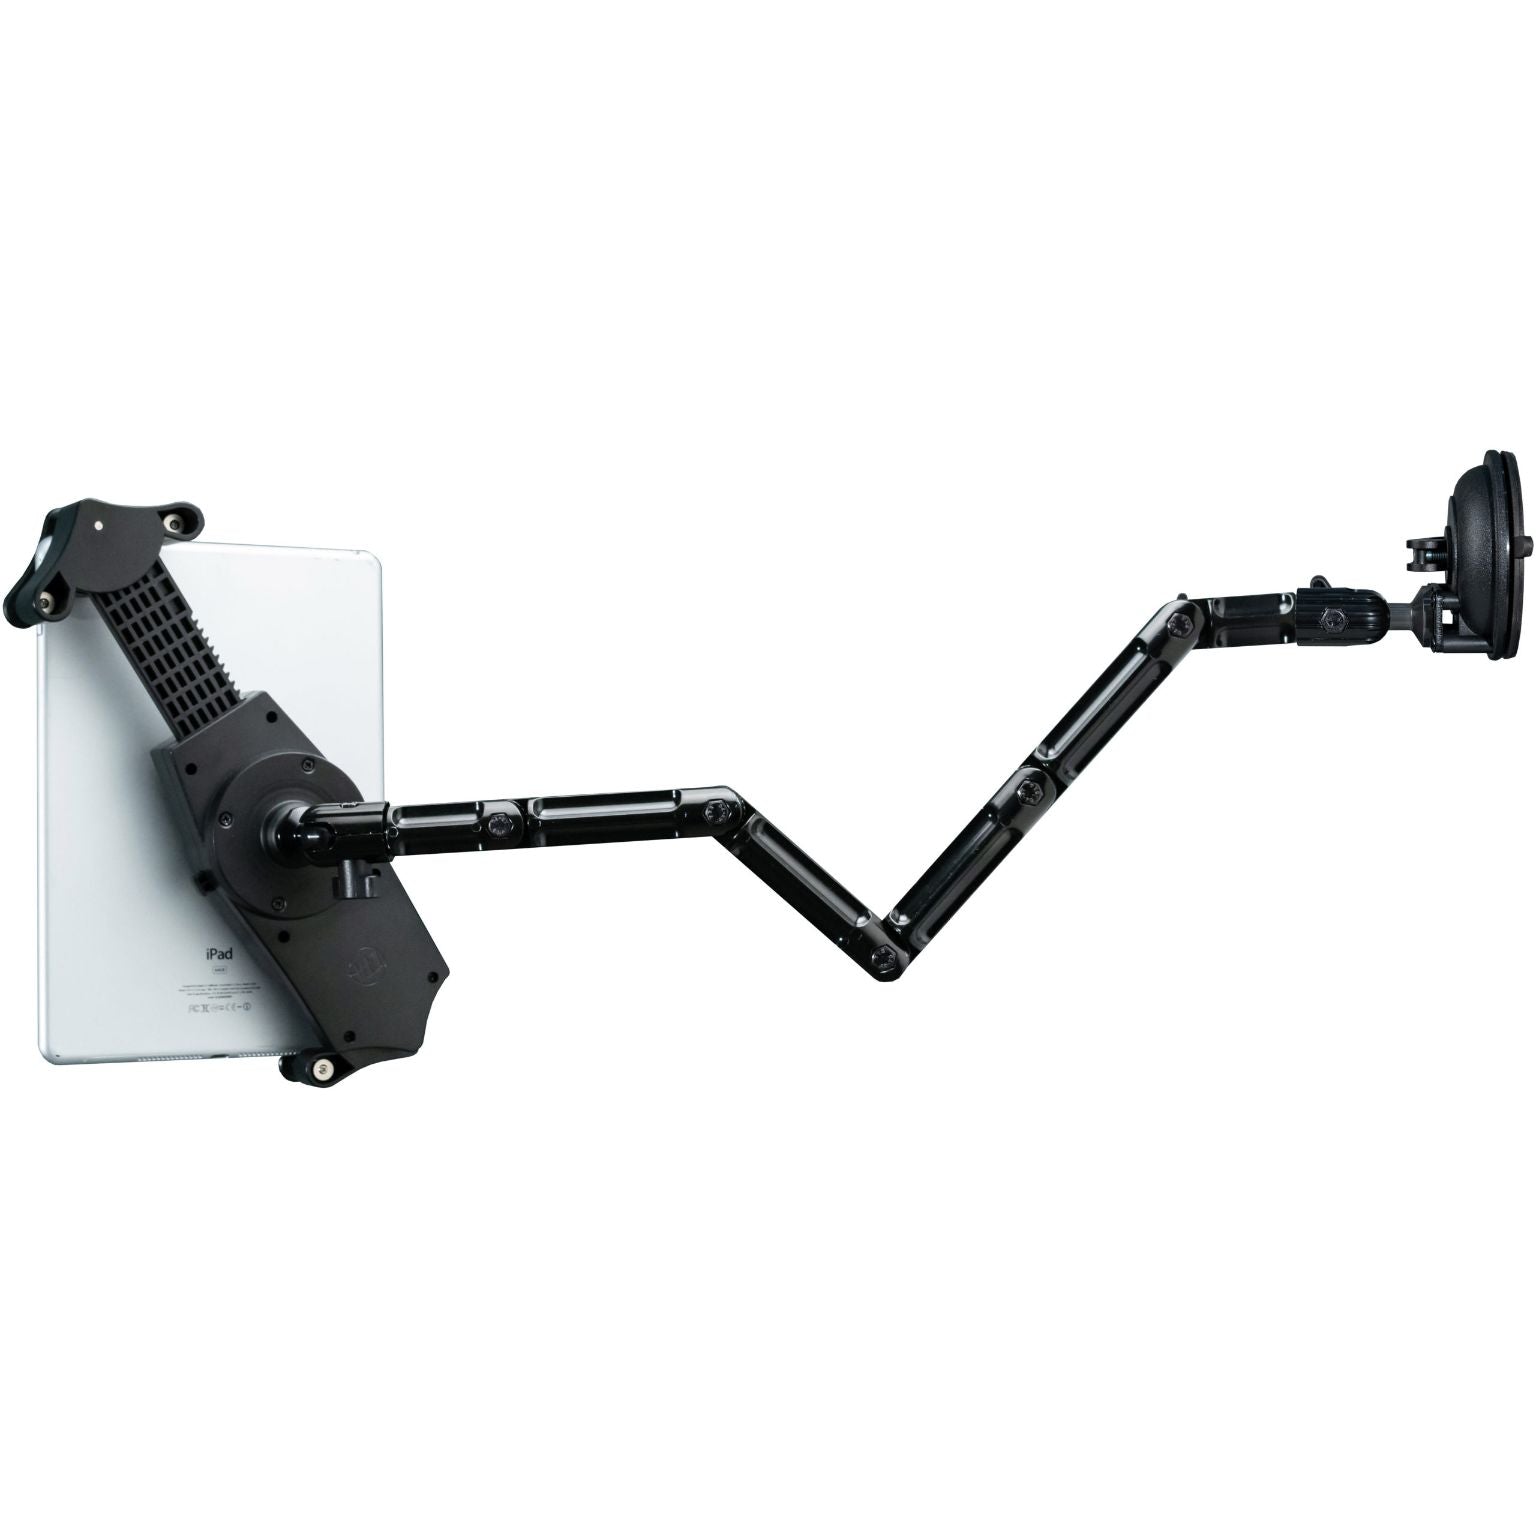 Custom Flex Suction Mount for 7-14 Inch Tablets